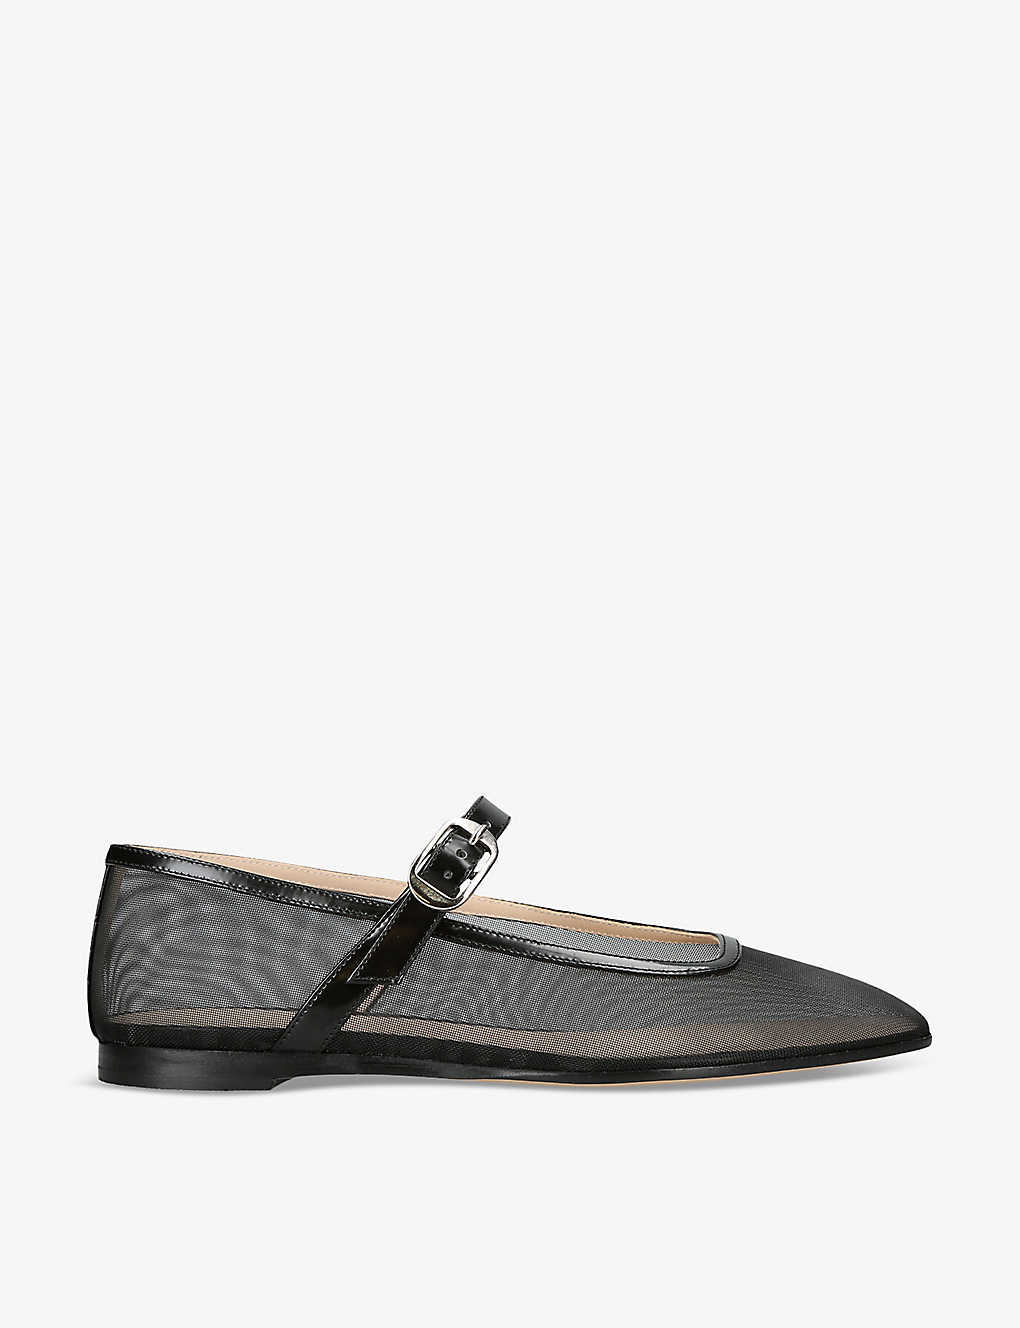 Shop Le Monde Beryl Women's Black Round-toe Trimmed Mesh And Patent-leather Mary Jane Courts